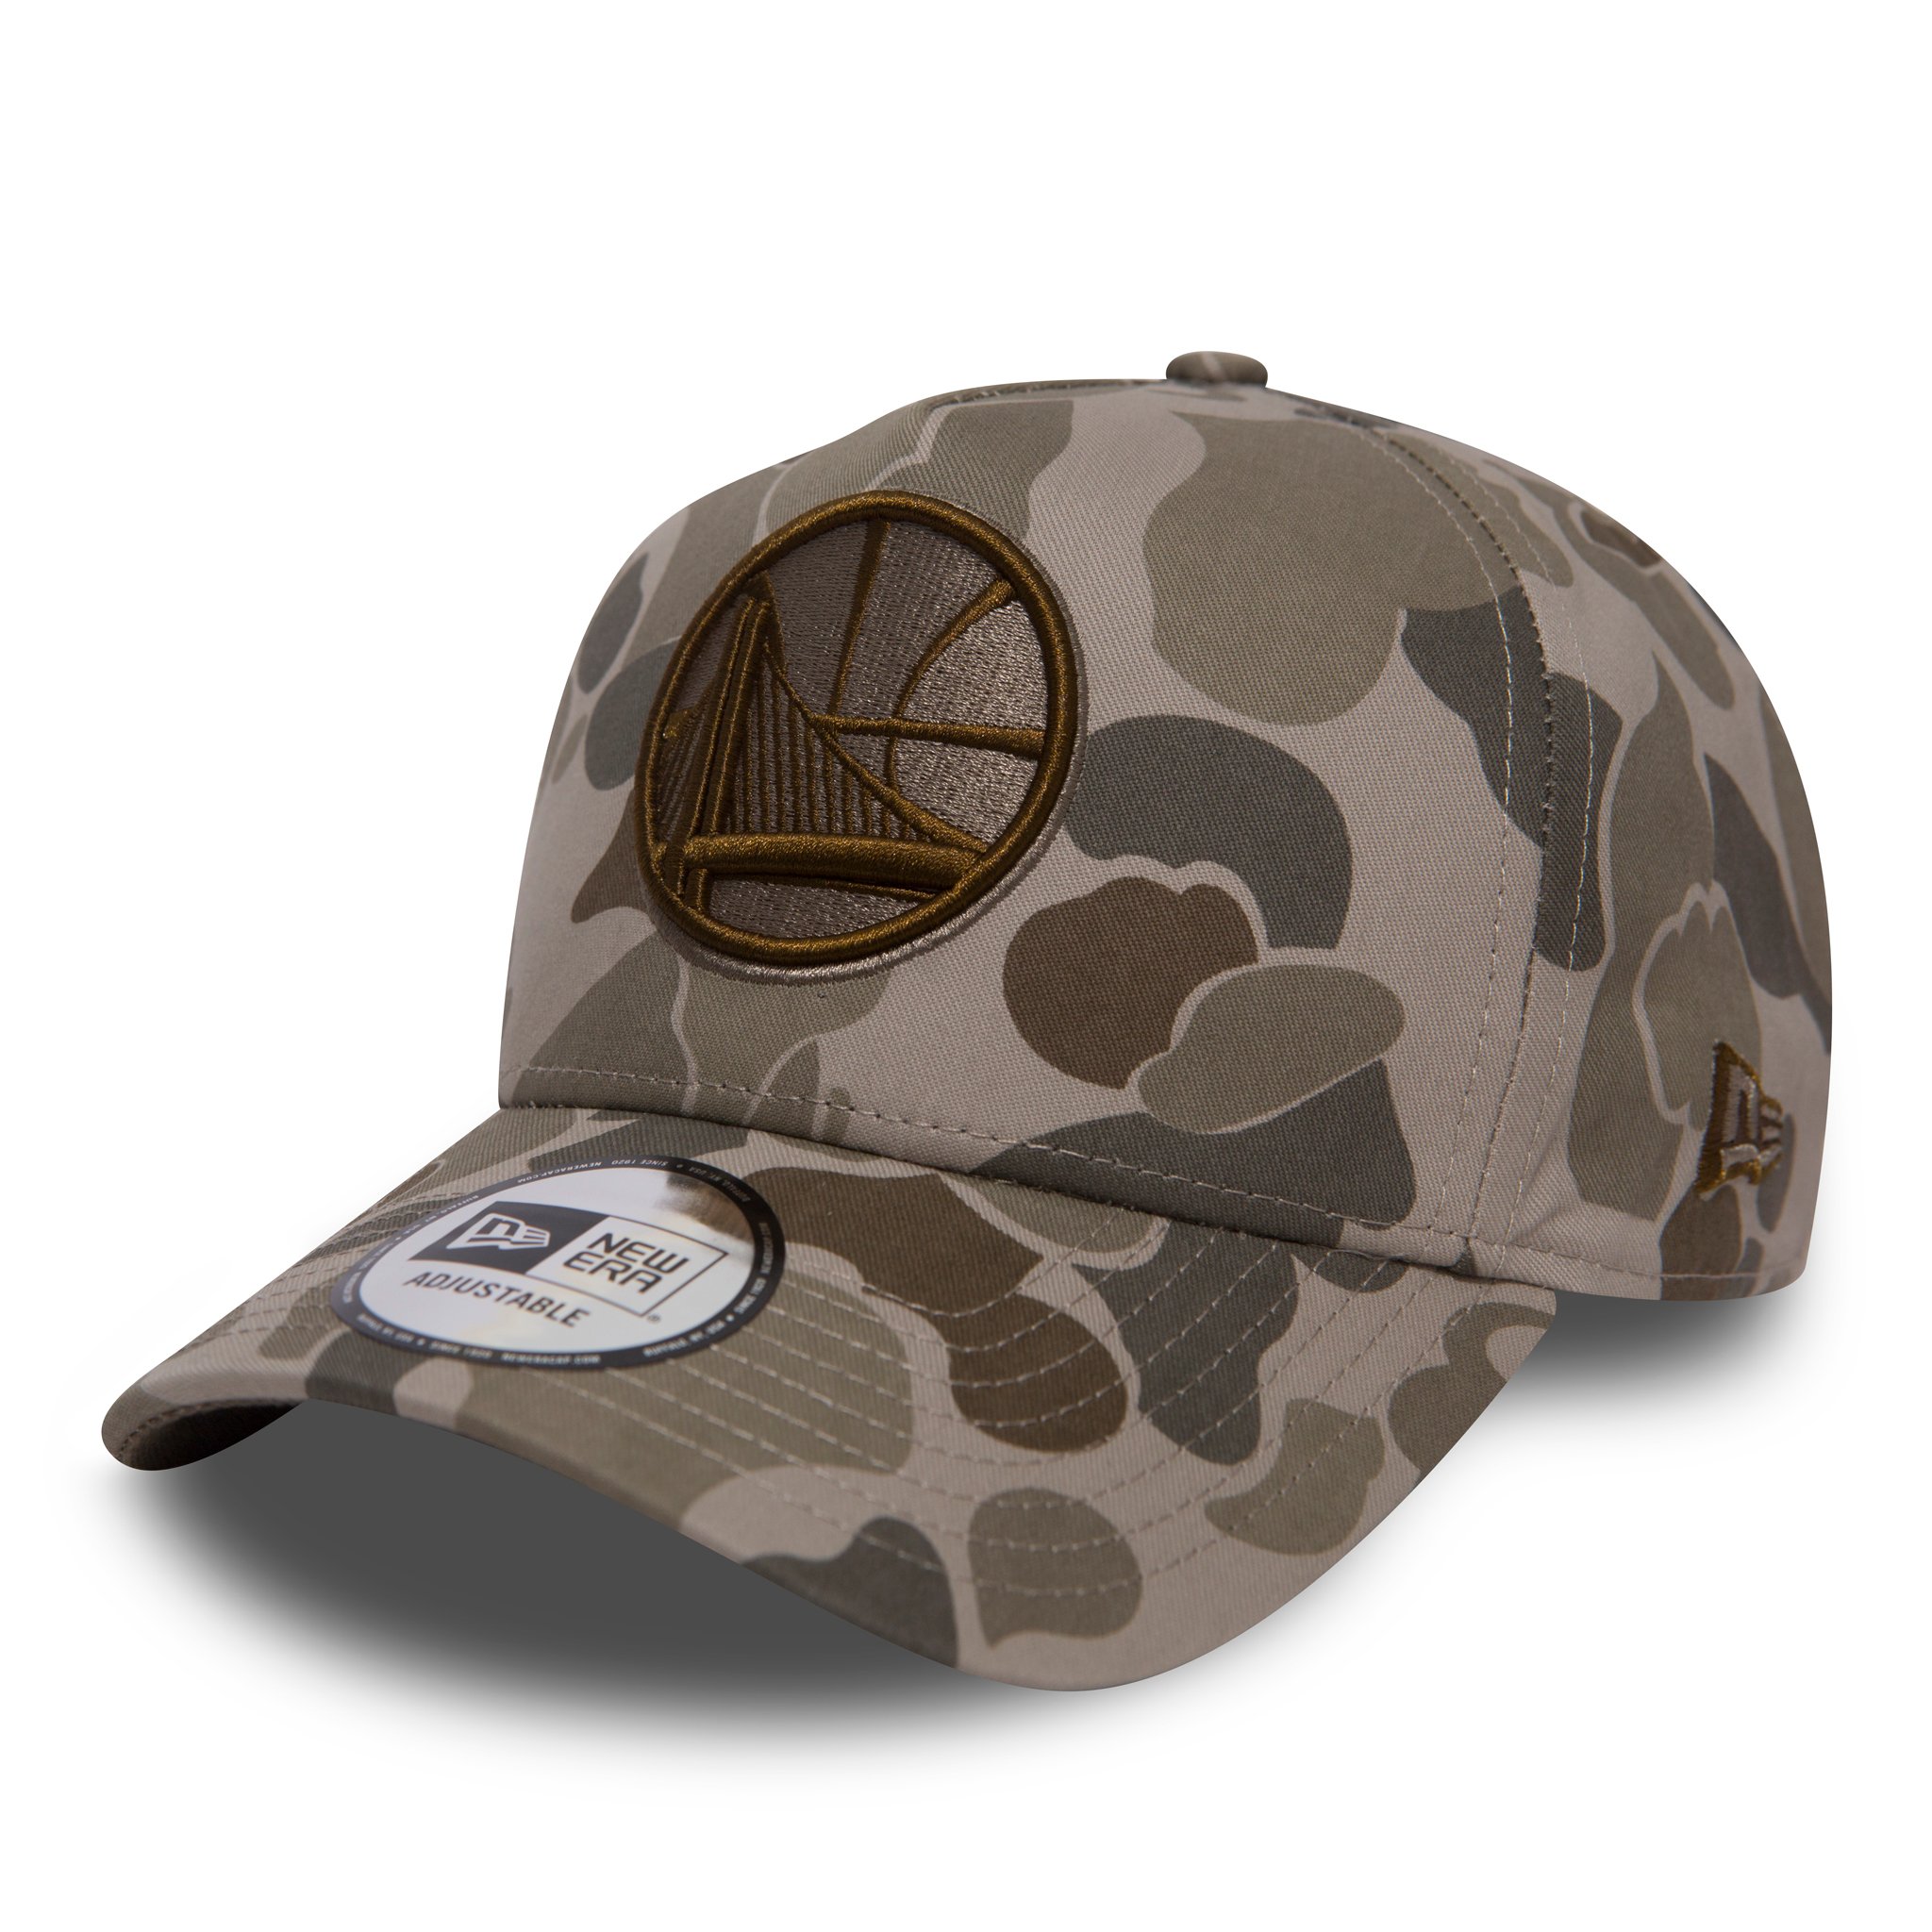 Casquette 9FORTY A-Frame camouflage des Warriors de Golden State